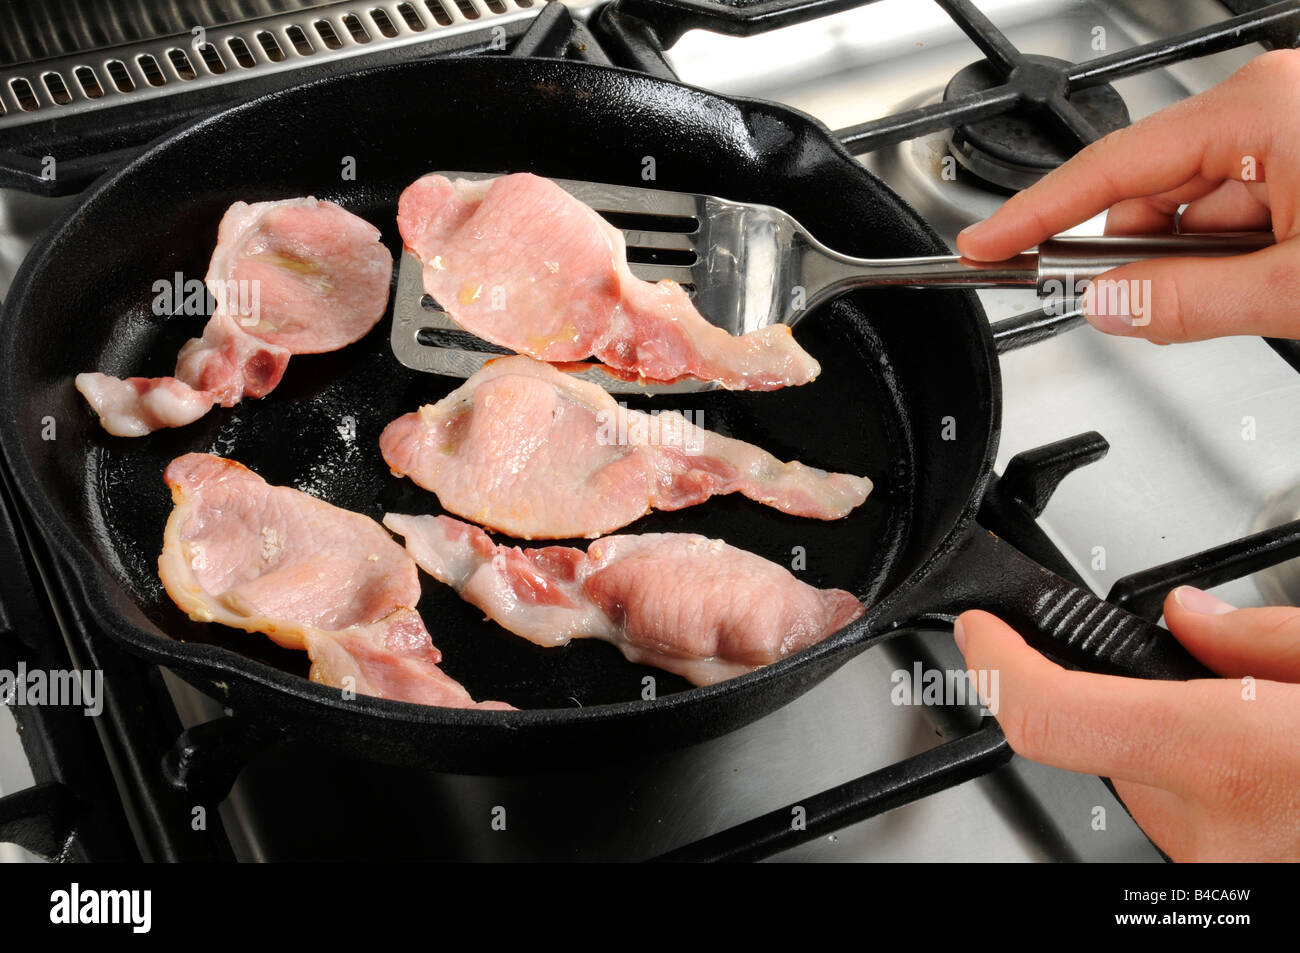 COOKING BACON Stock Photo